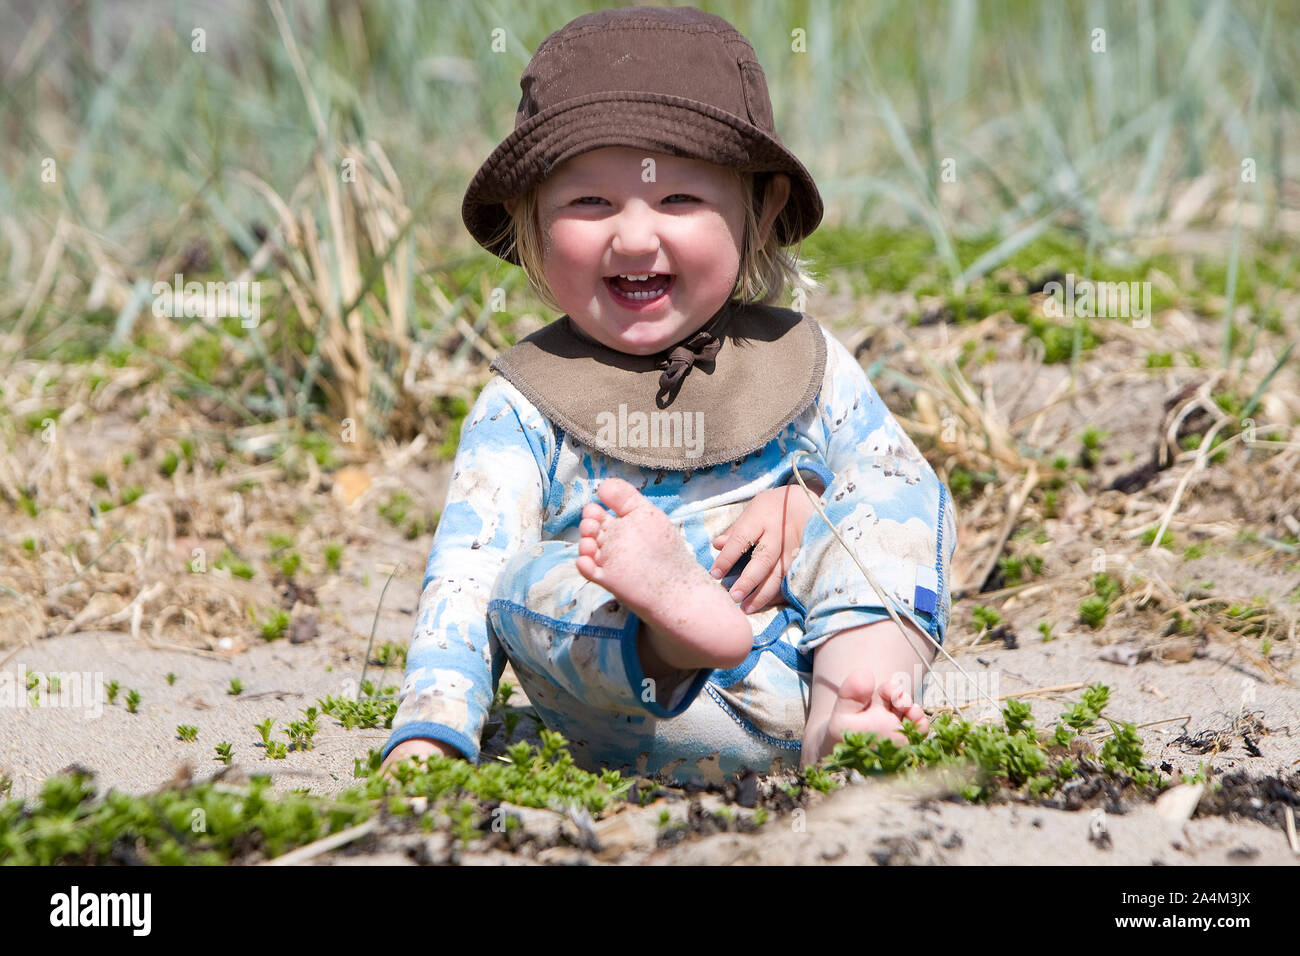 Portrait of a boy outdoors Stock Photo